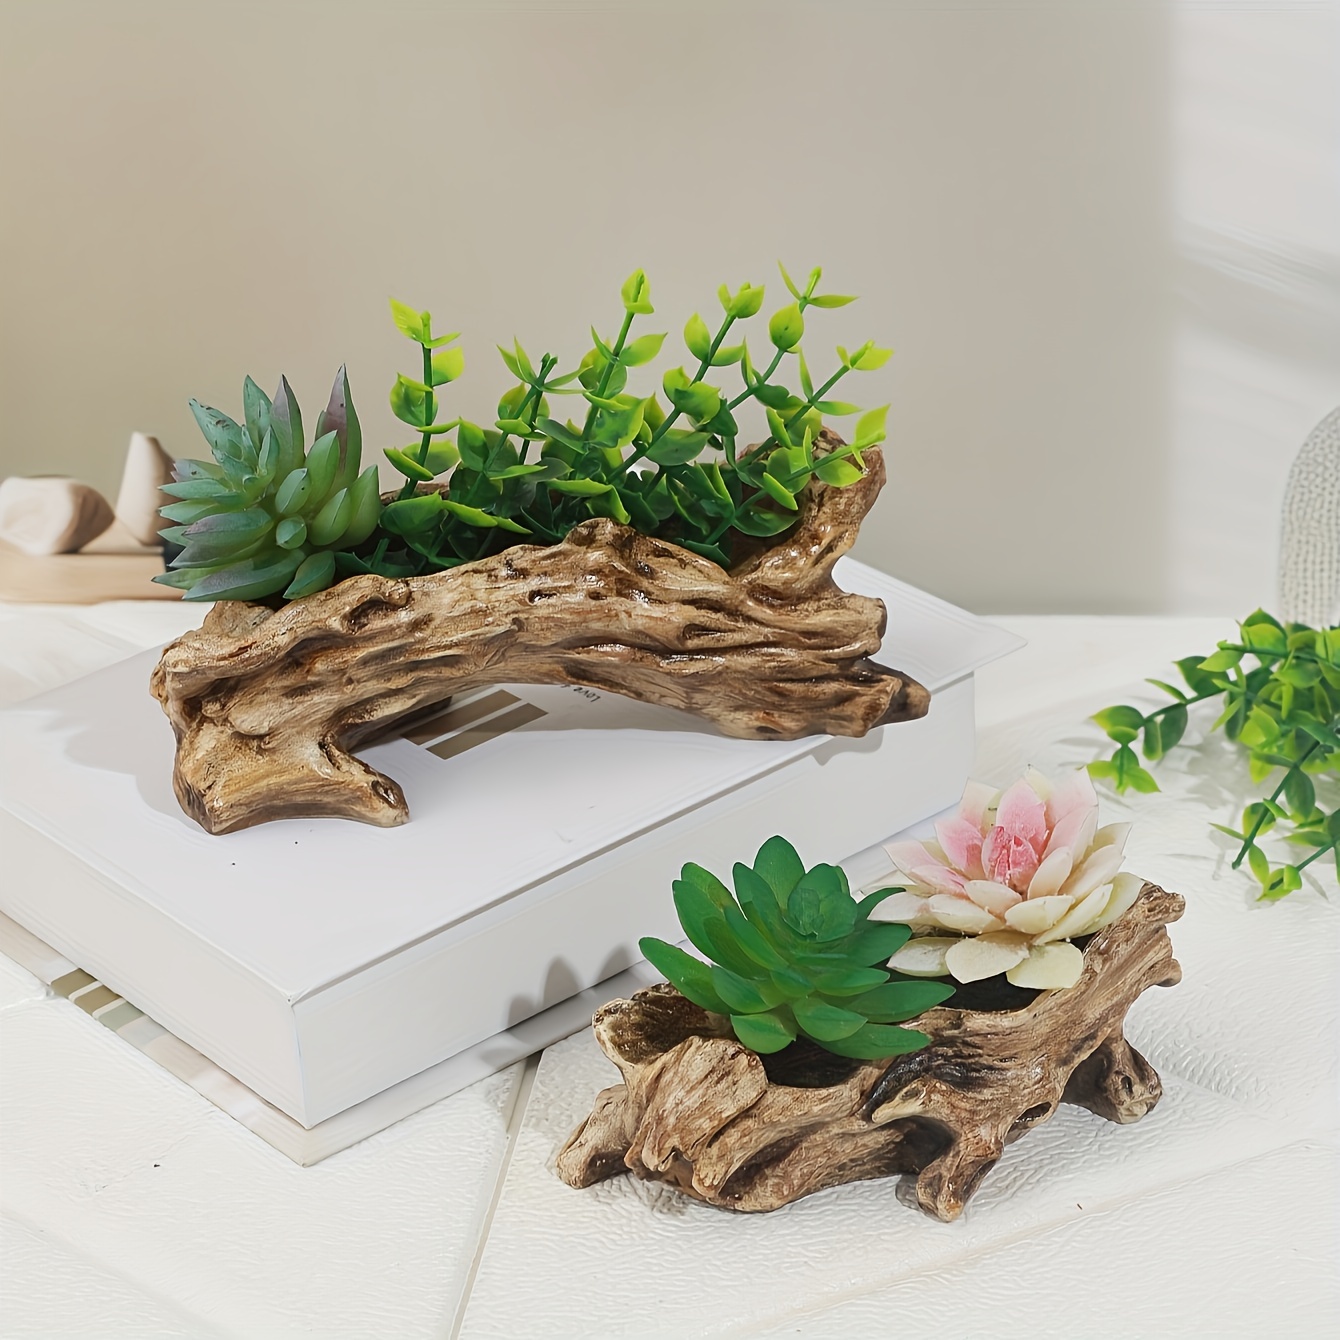 

Creative Resin Tree Root-shaped Succulent Planter - Natural Style Home Decor Vase